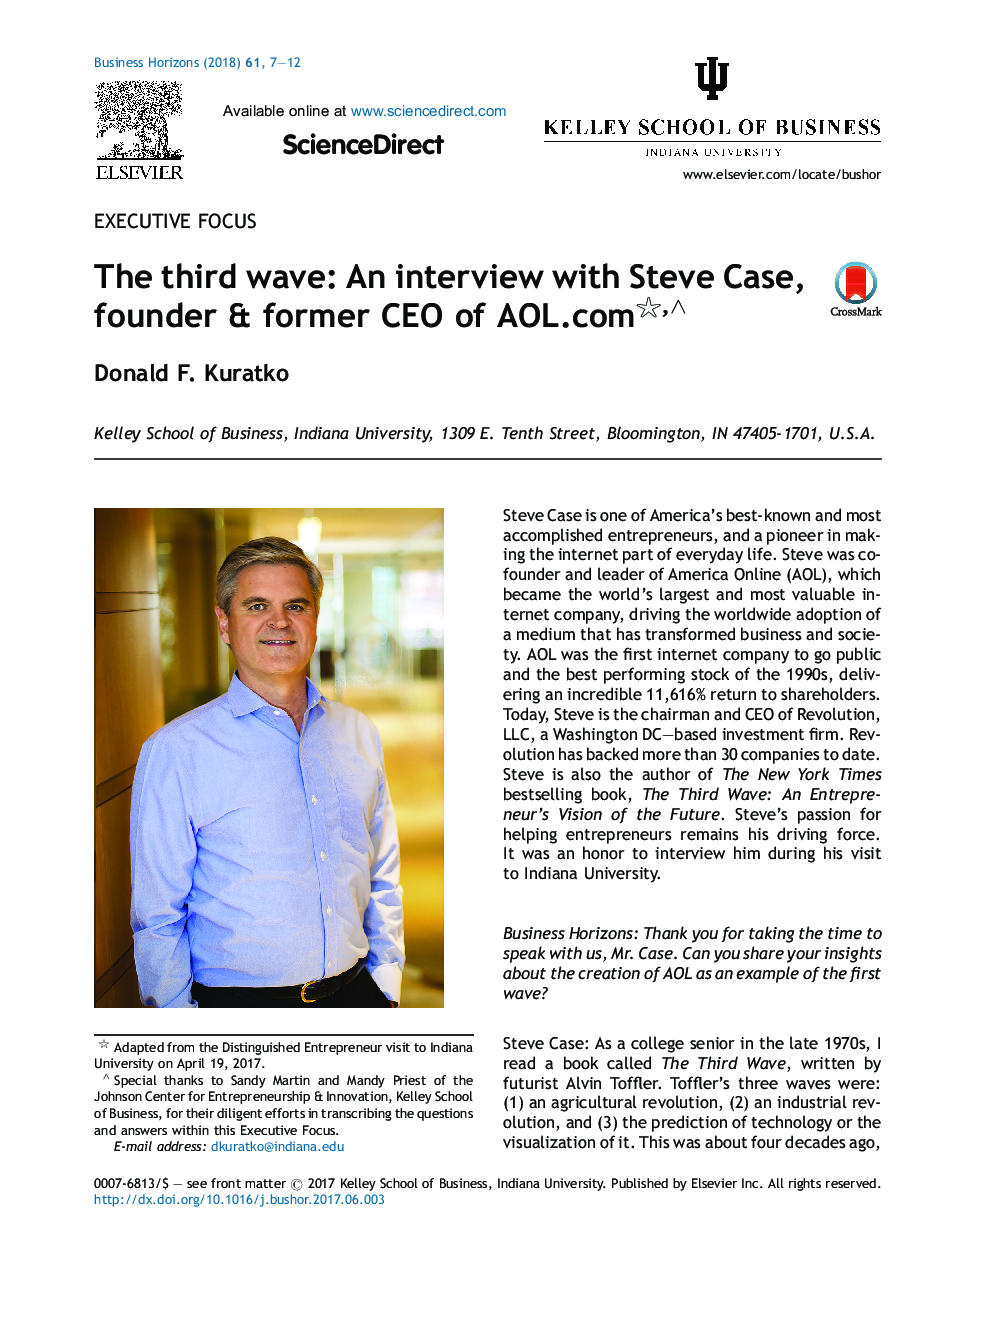 The third wave: An interview with Steve Case, founder & former CEO of AOL.com